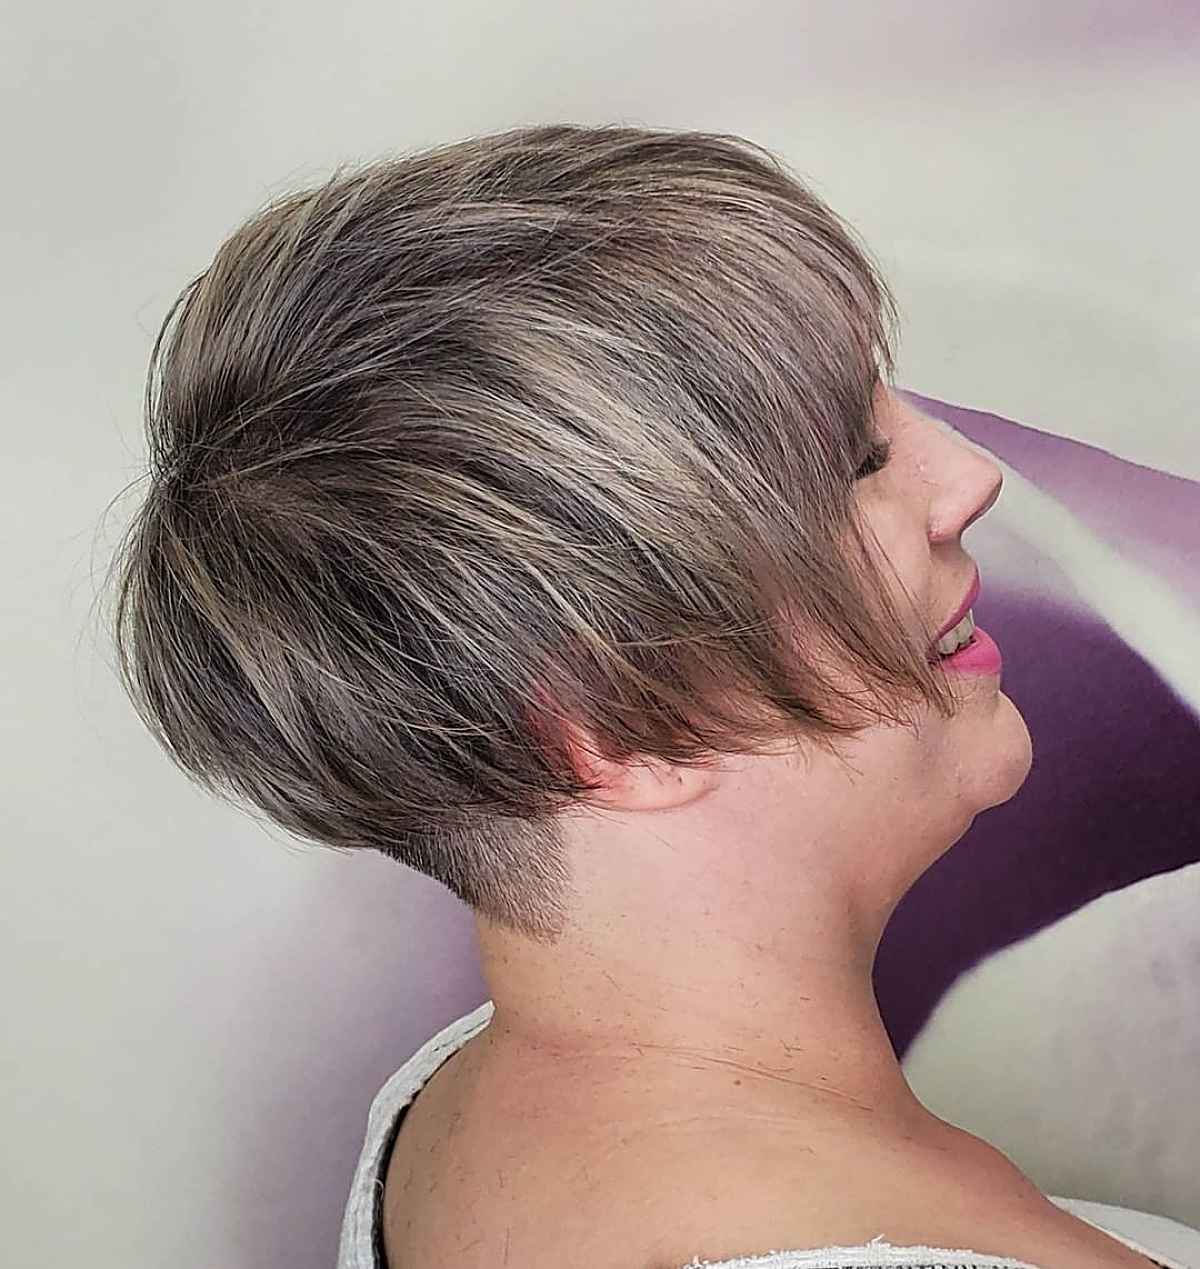 19 Undercut Pixie Bob Haircuts To Consider for a Short &#038; Easy Cut to Style